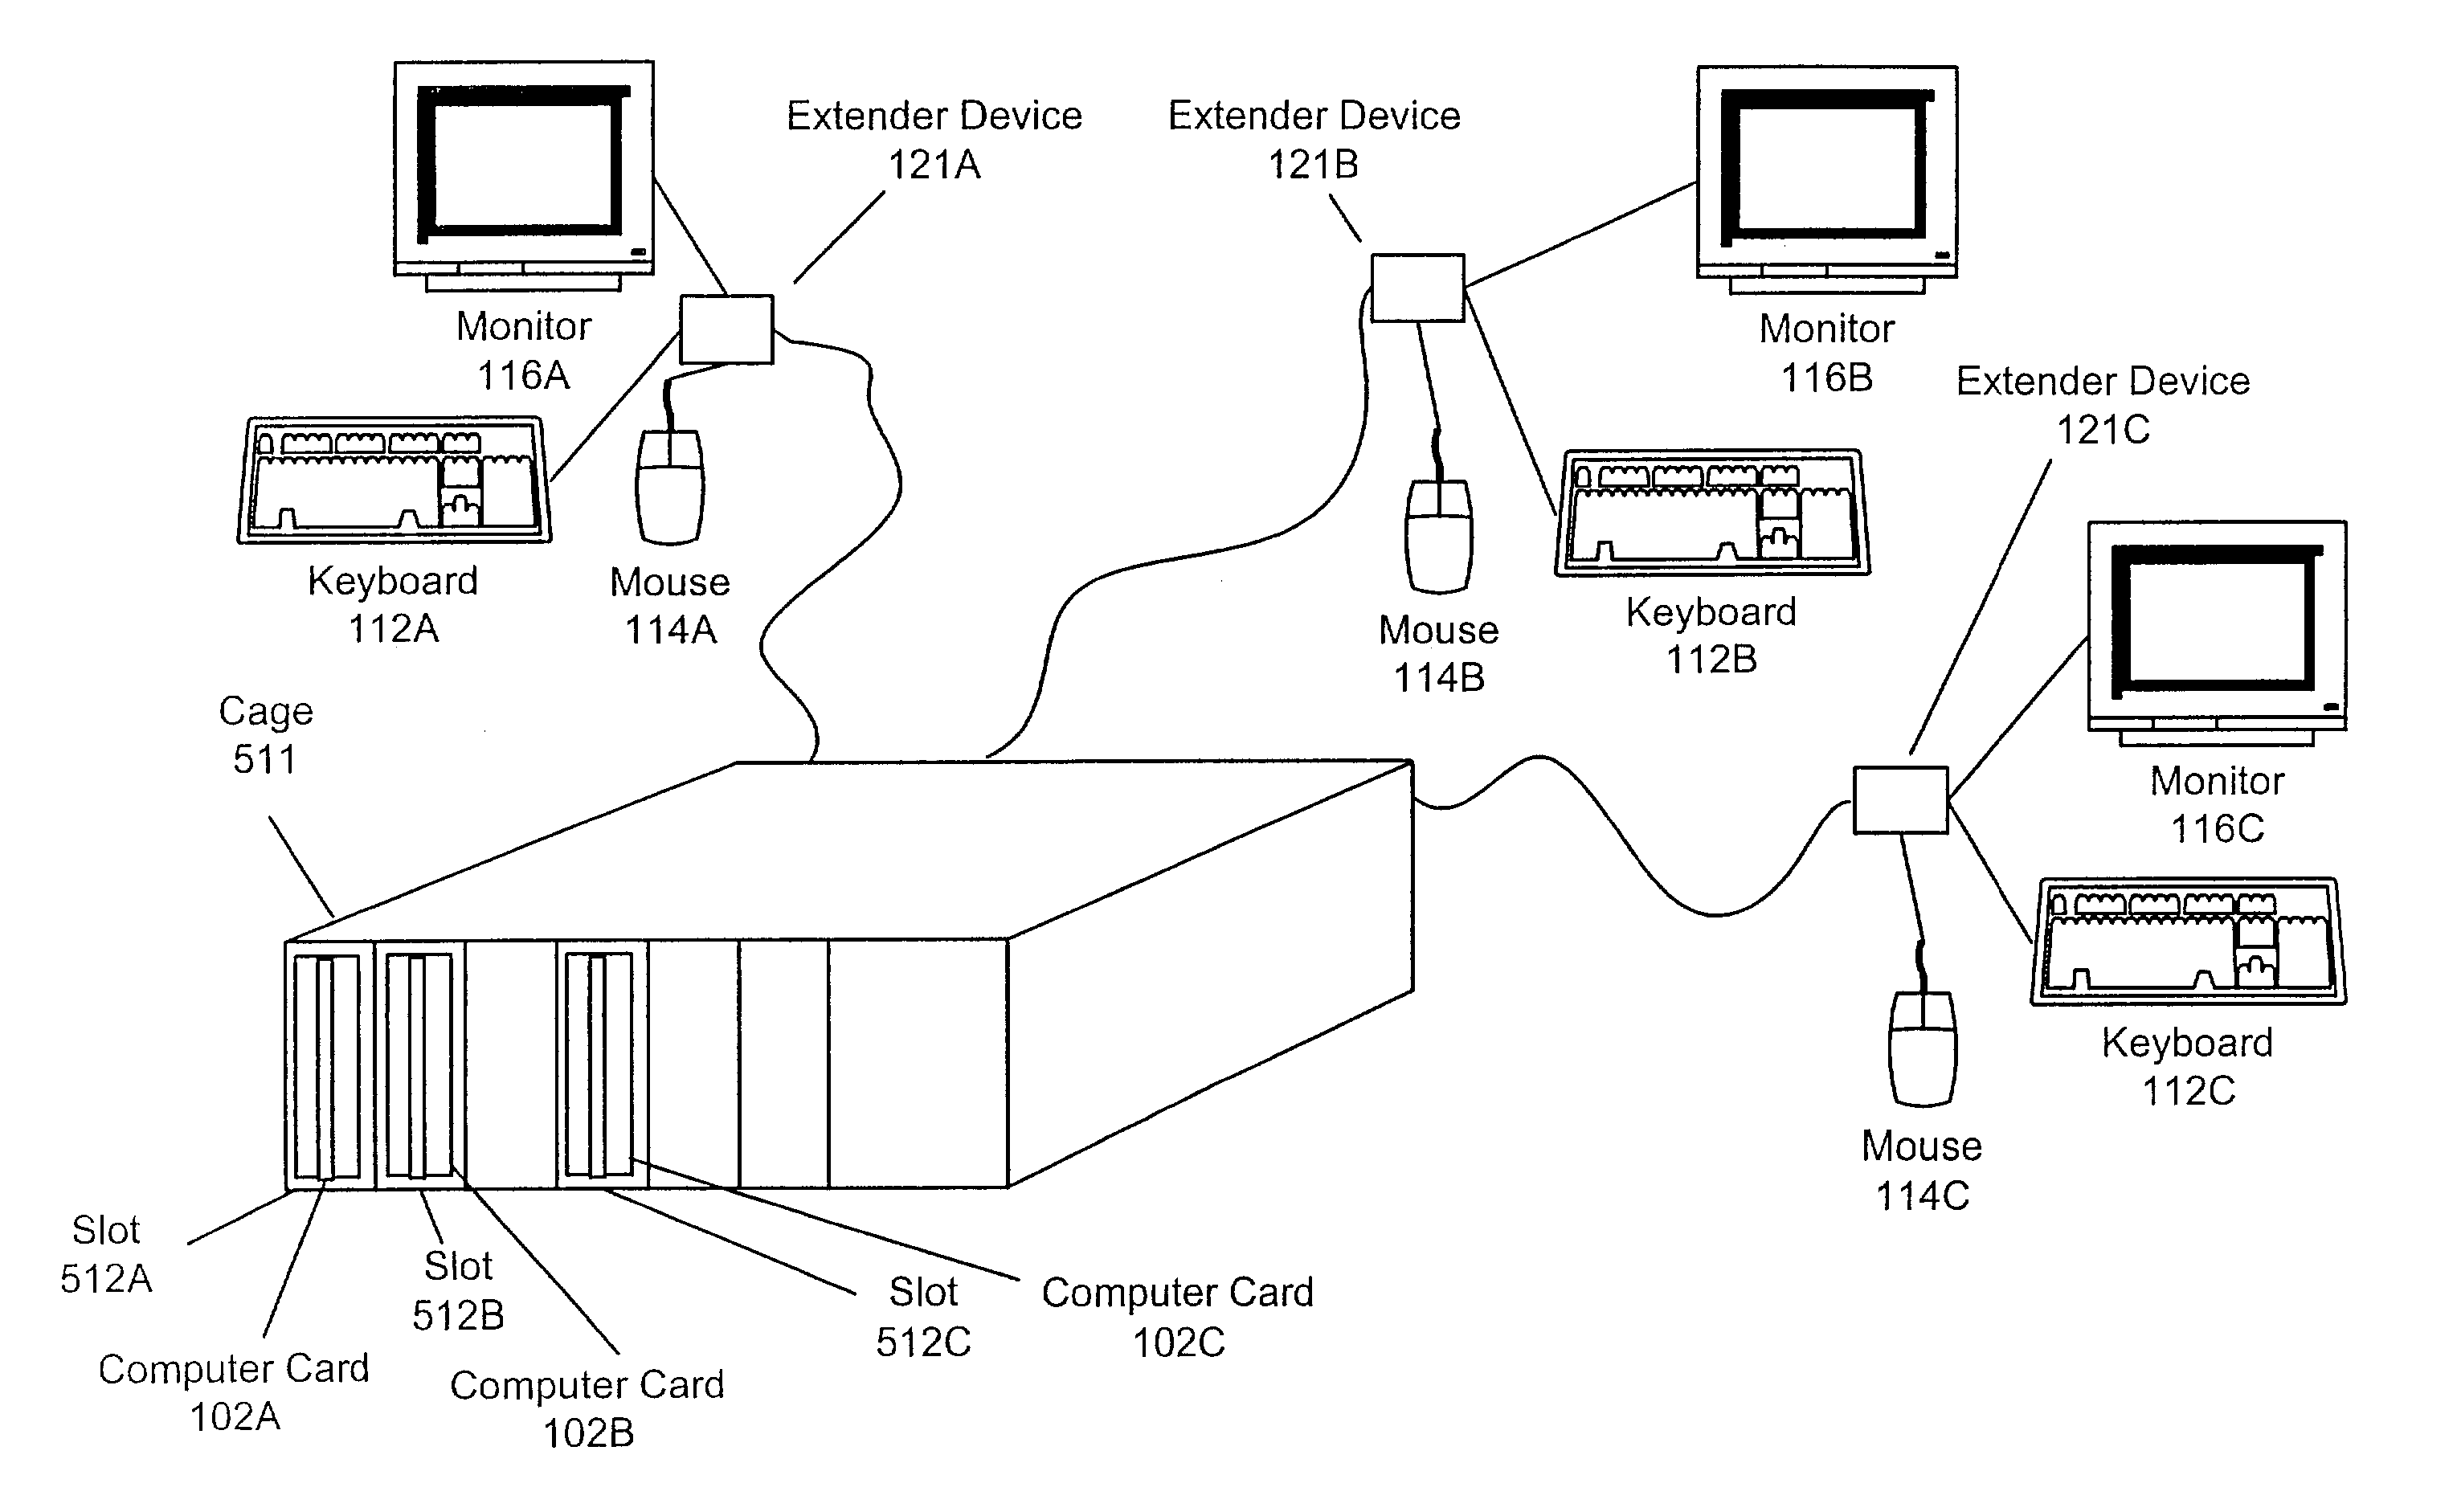 System of co-located computers with content and/or communications distribution